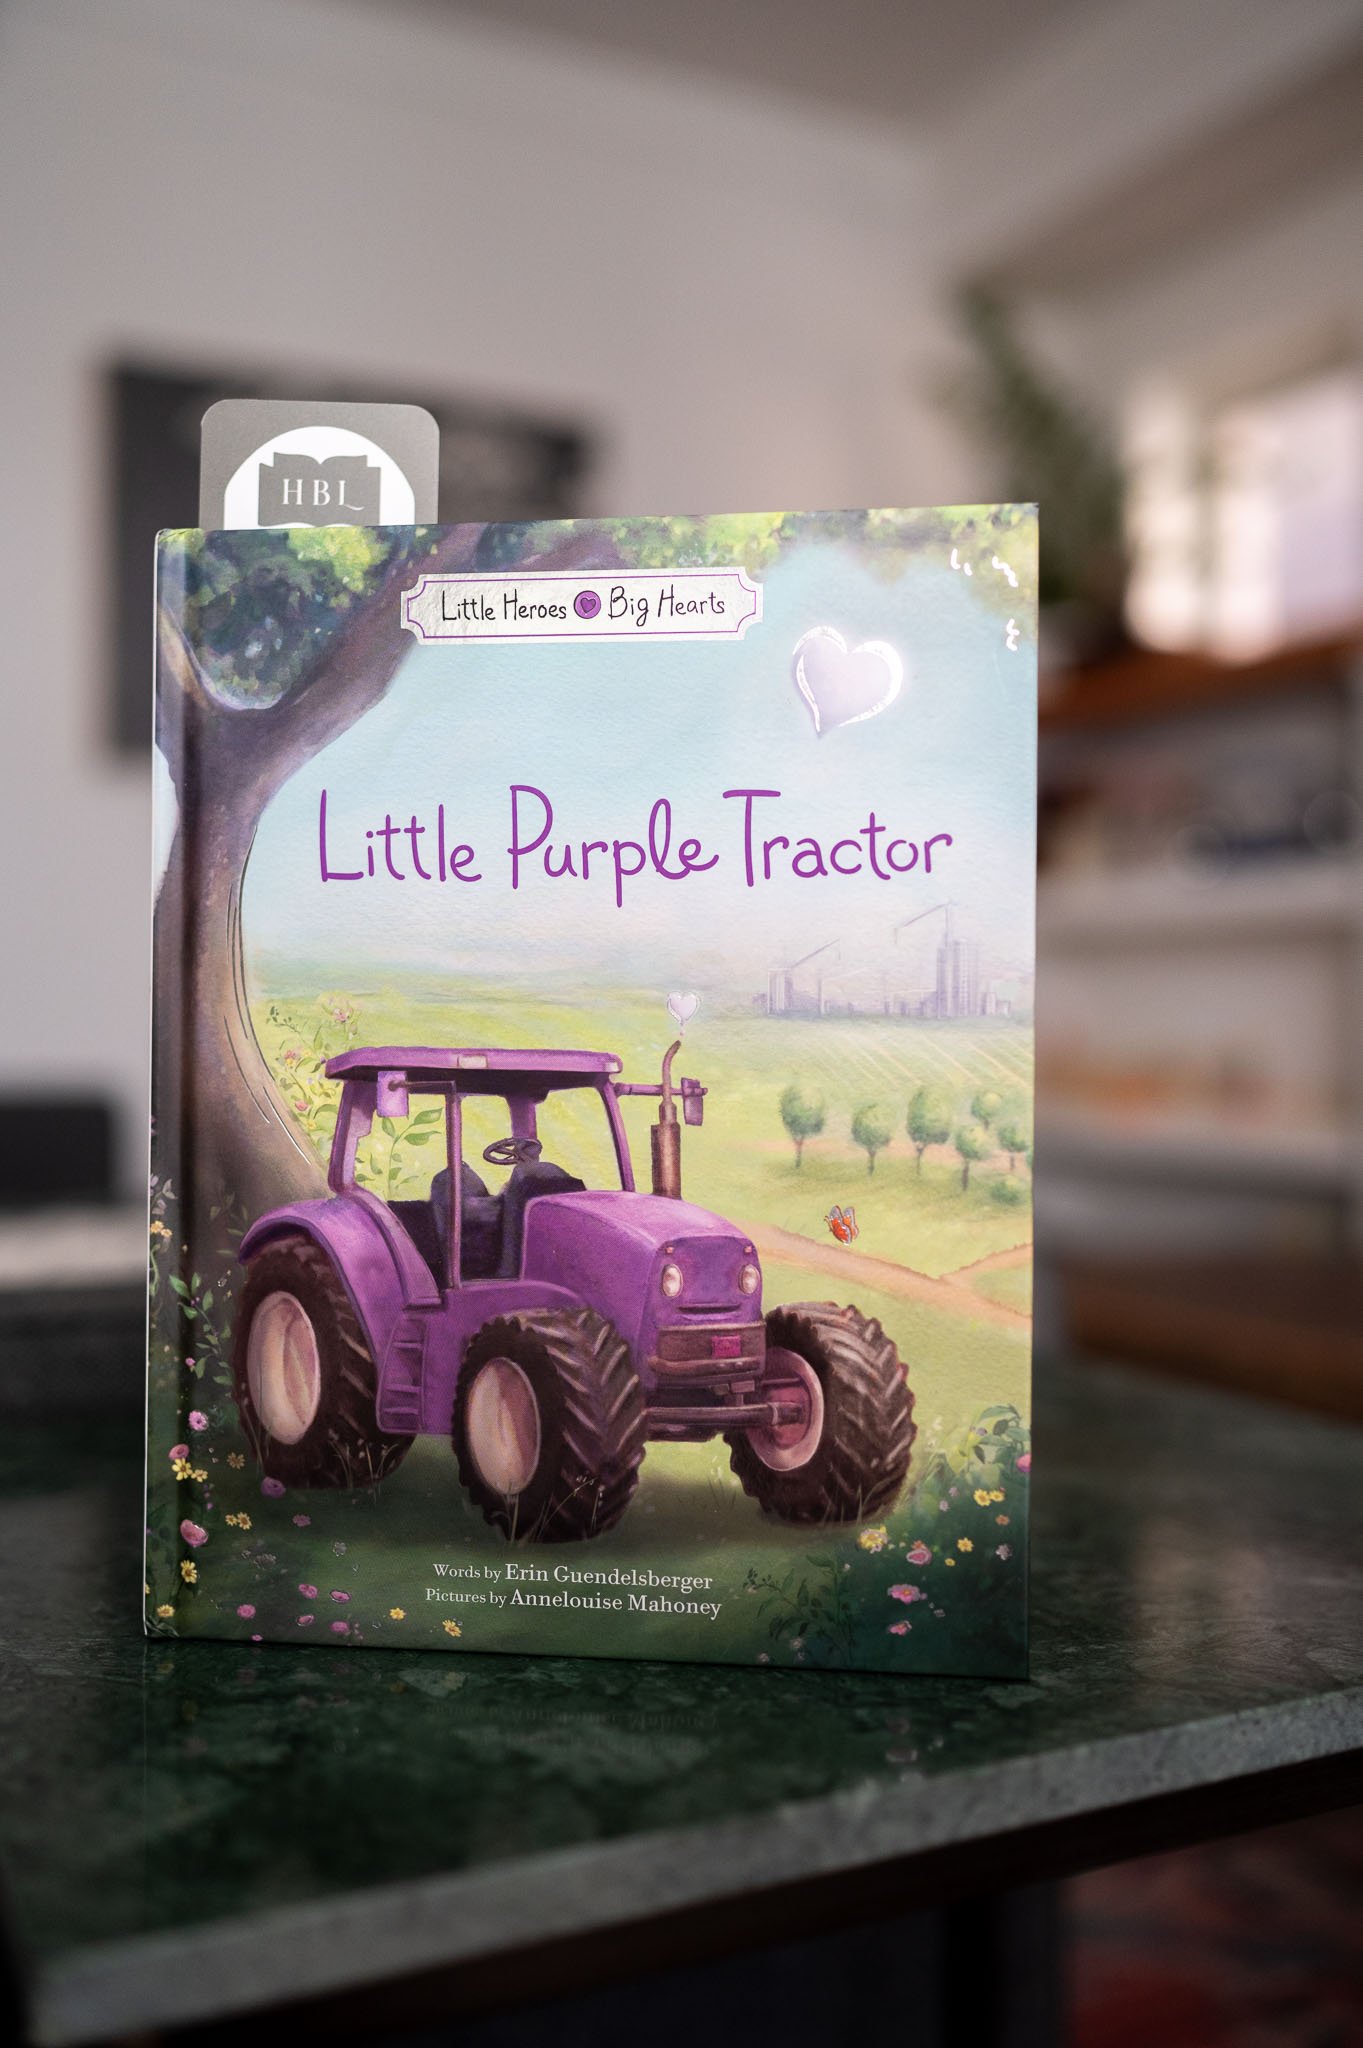 Little Purple Tractor by Erin Guendelsberger and Annelouise Mahoney .jpg